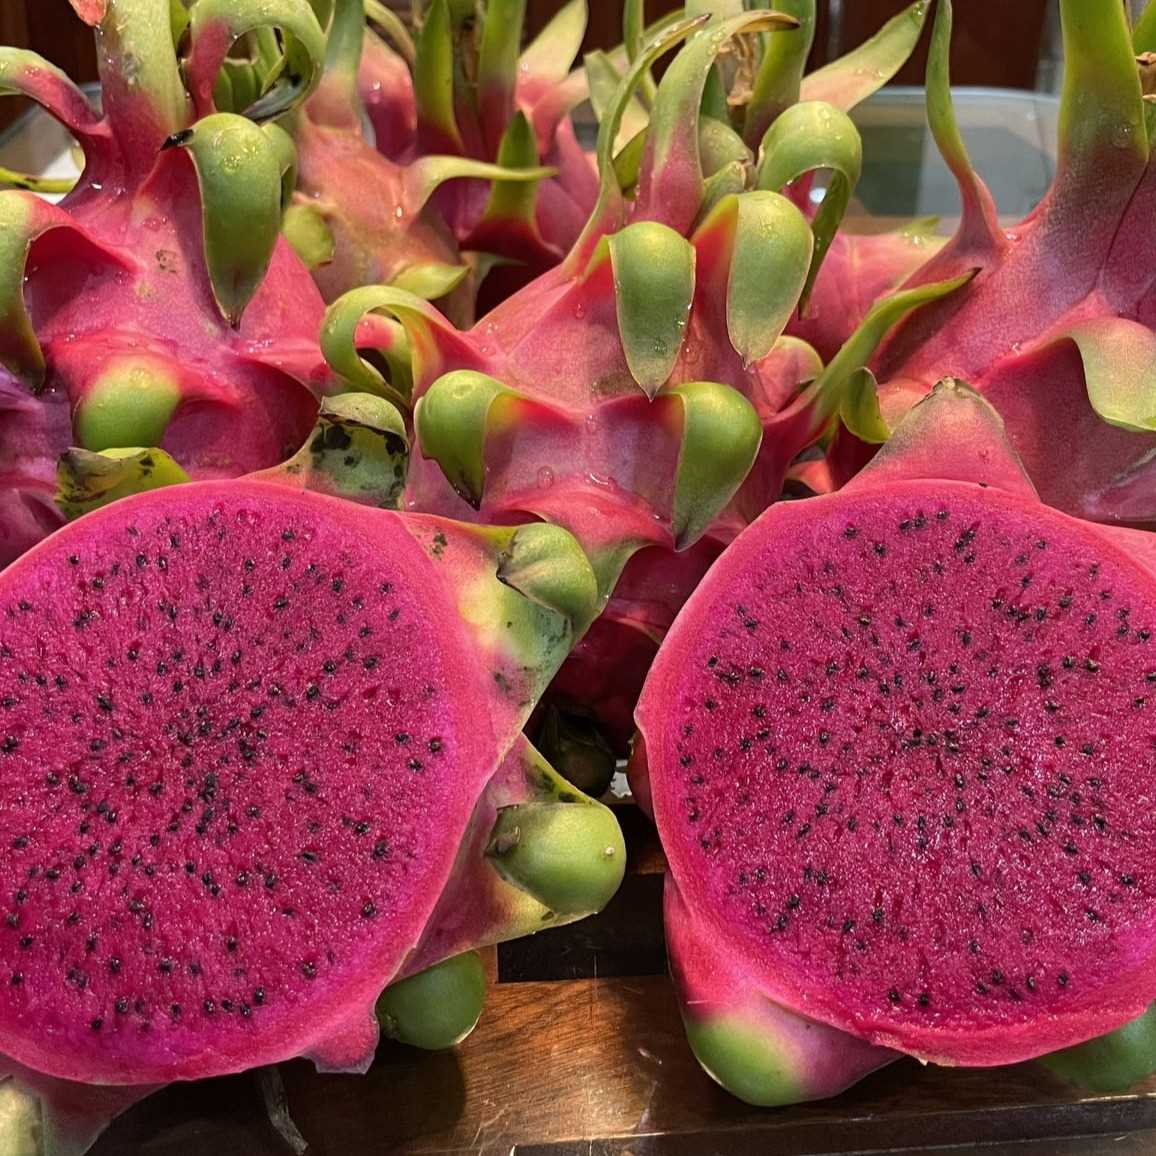 I AM LOOKING FOR DRAGON FRUIT